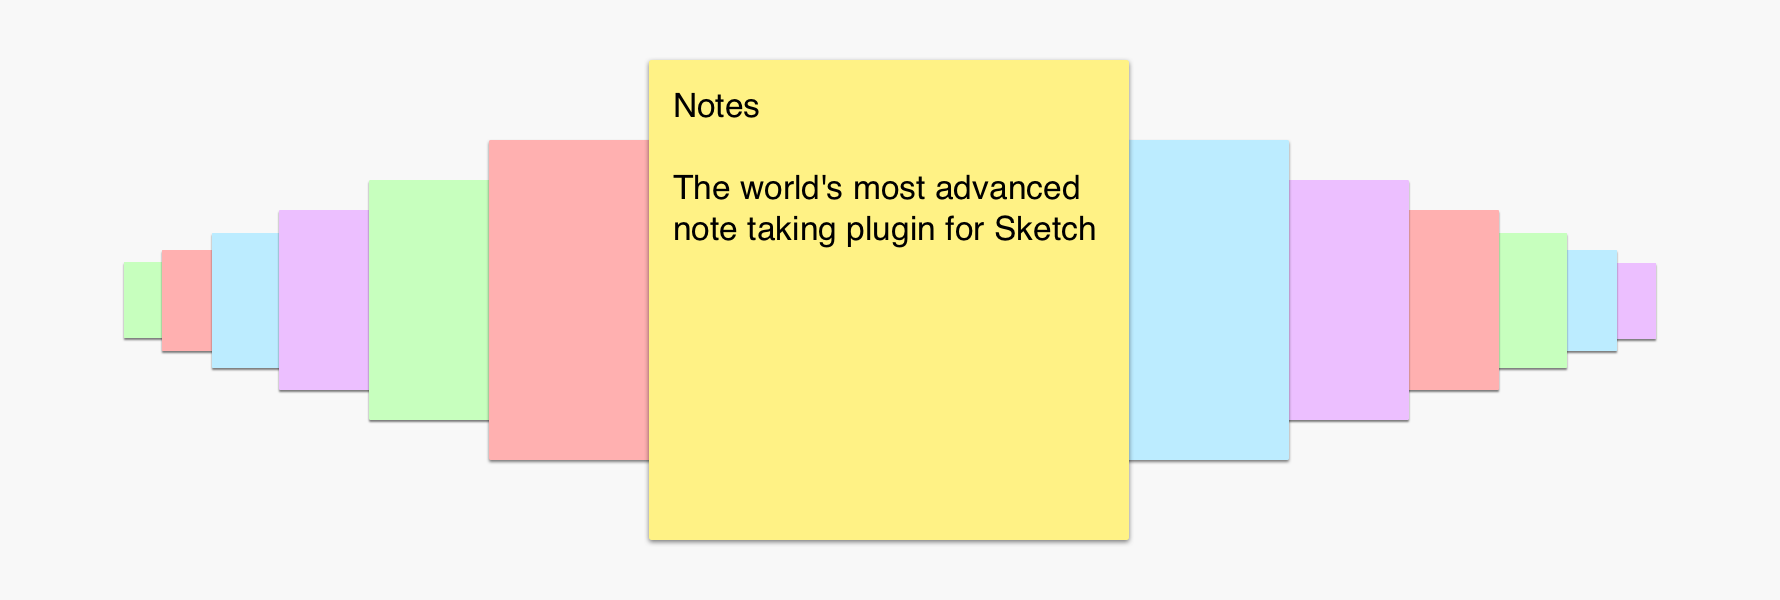 The world's most advanced note taking plugin for Sketch.